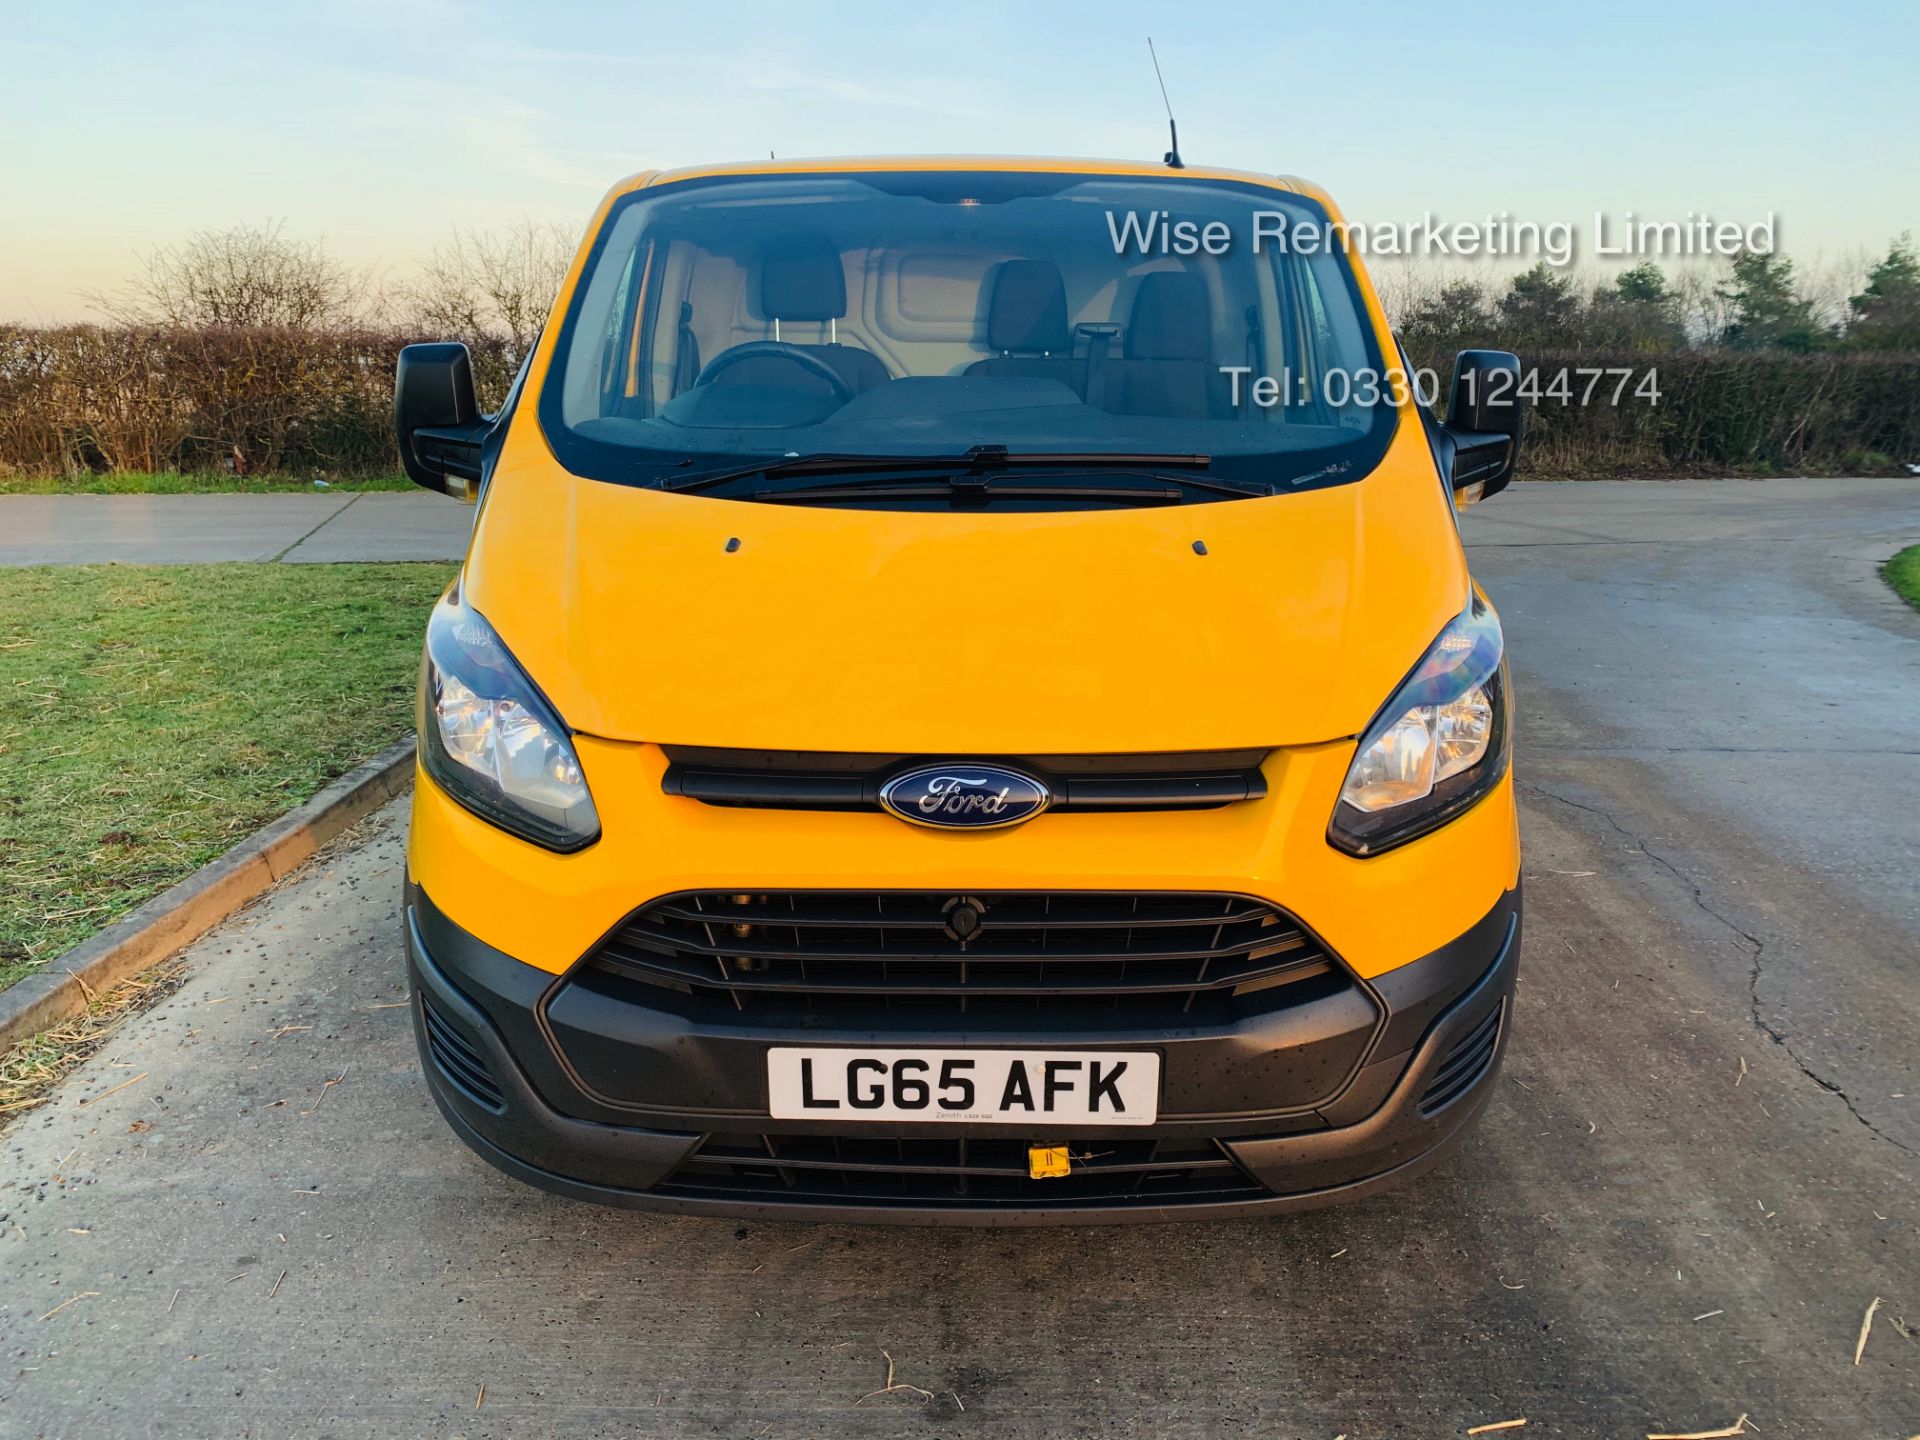 Ford Transit Custom 2.2 TDCI 310 Eco-Tech - 2016 Model - 1 Keeper From New - Air Con - Ex AA Van - Image 2 of 23